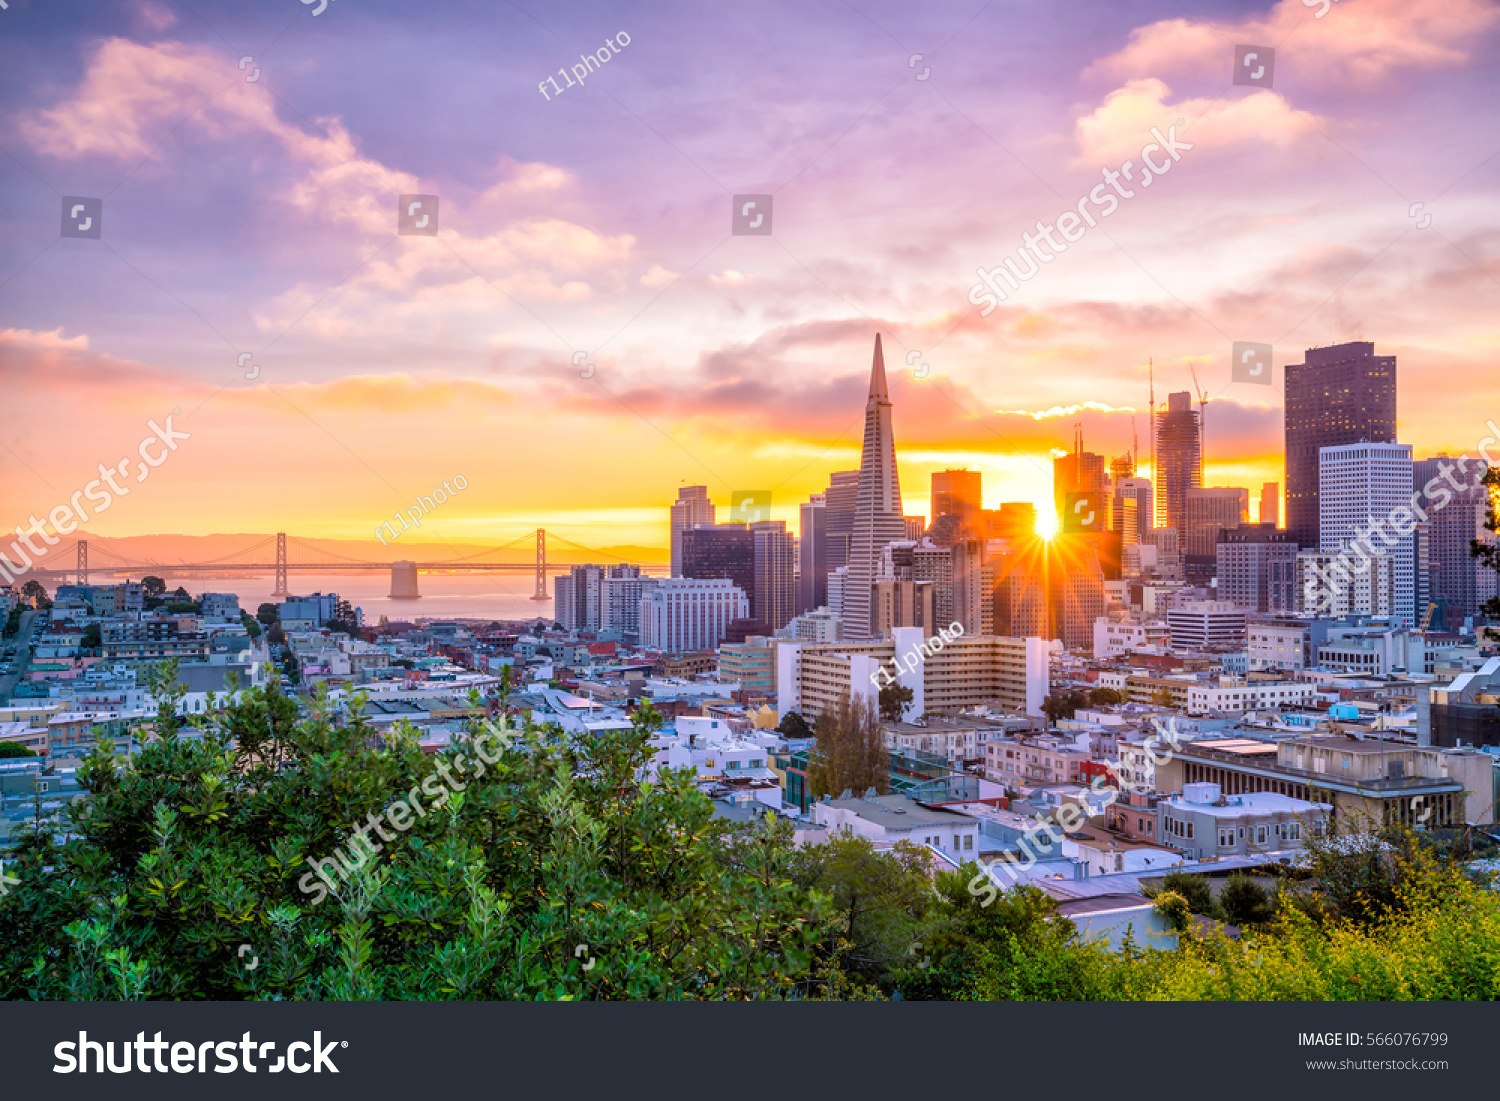 Beautiful view of business center in downtown San Francisco in USA at dusk. #566076799